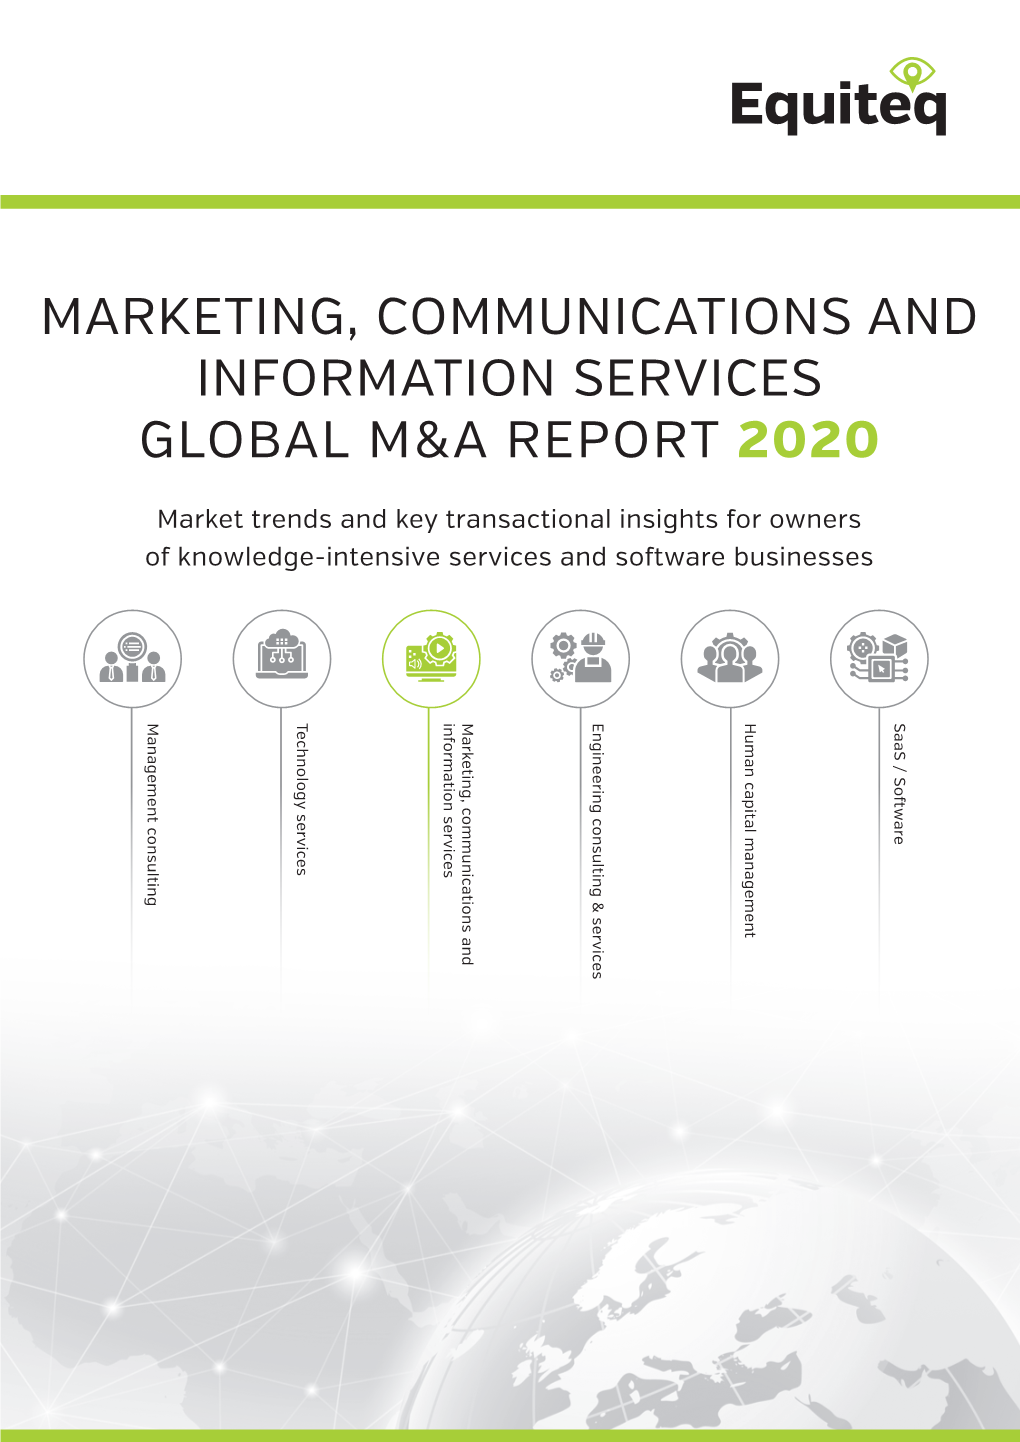 Marketing, Communications and Information Services Global M&A